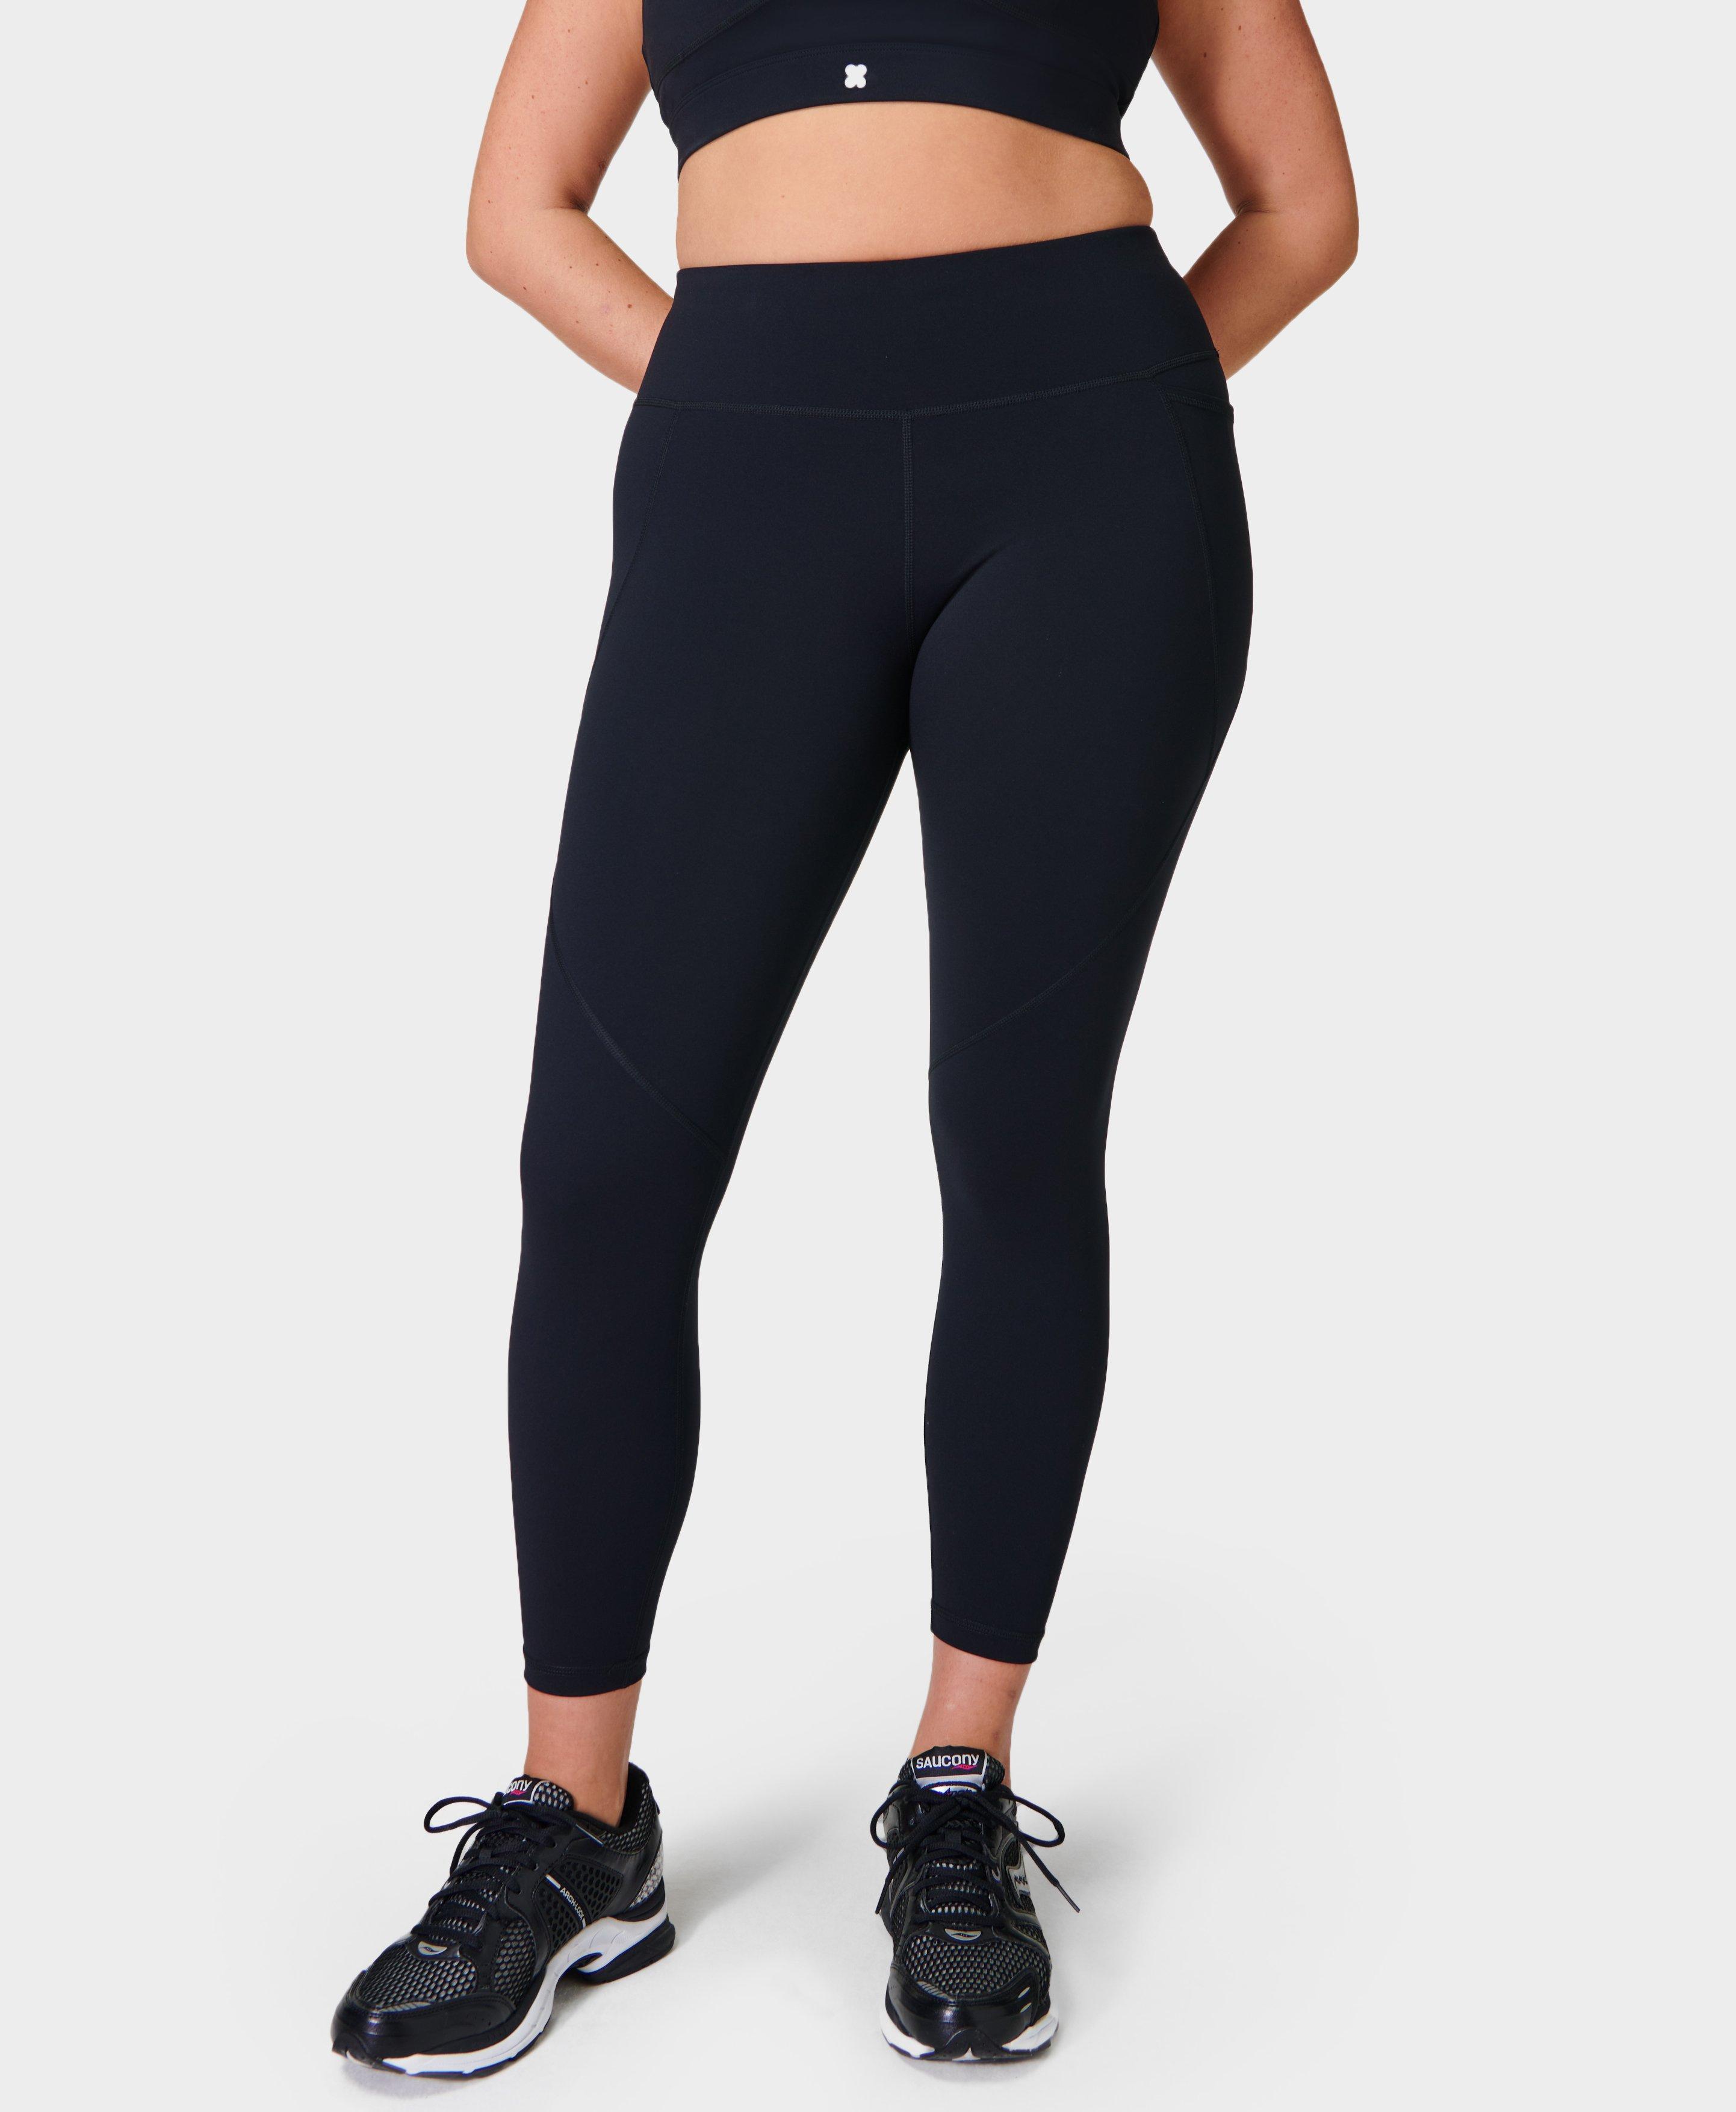 Pedal Pushers Yoga Pants  Shop for Leggings for Yoga Online – Downtown  Betty